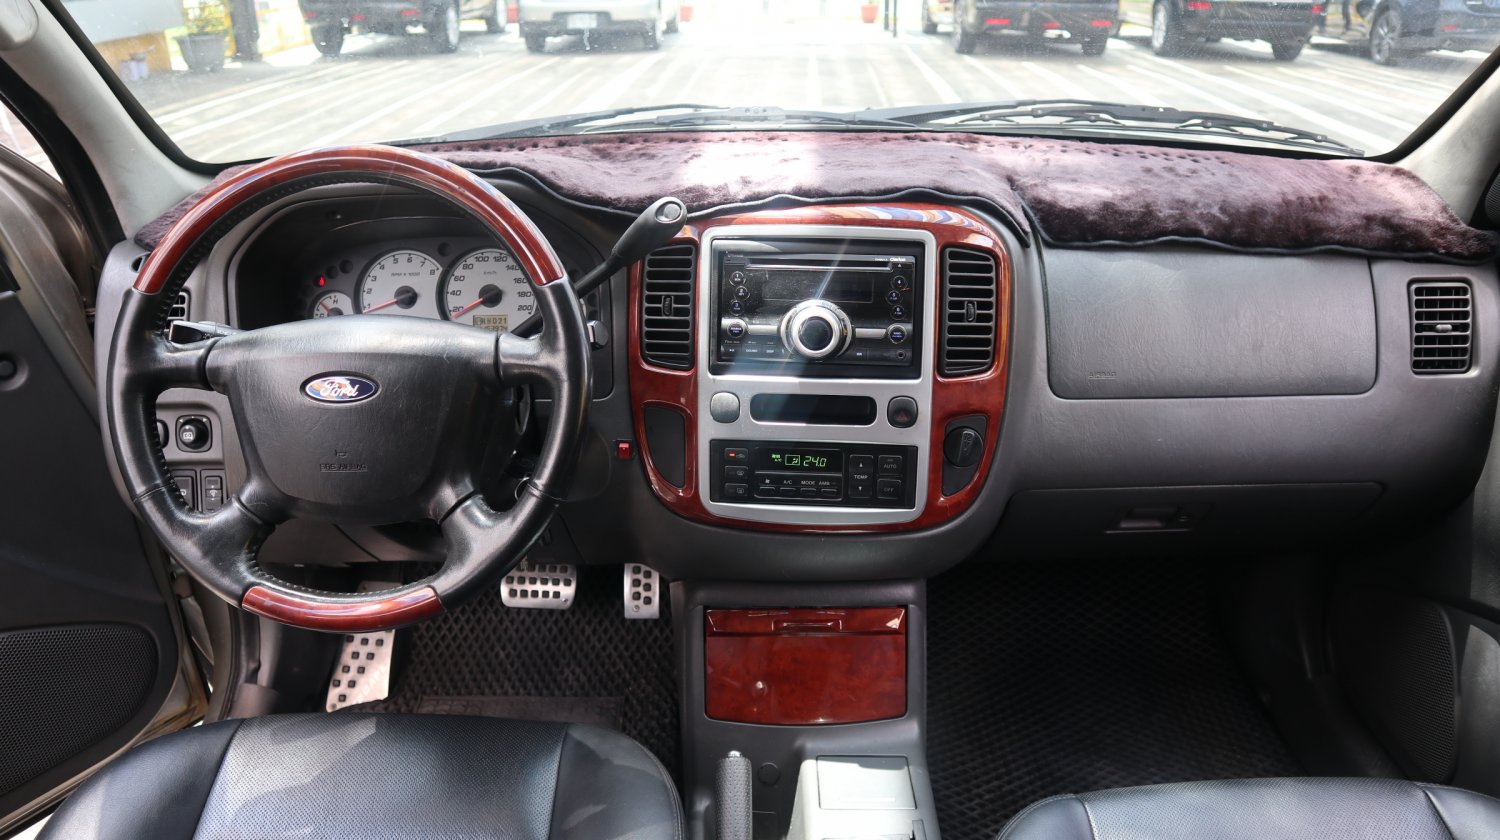 Ford 福特 ／ Escape ／ 2006年 ／ 2006年 Ford Escape 淺棕灰色 福特中古休旅車 ／ 成交區